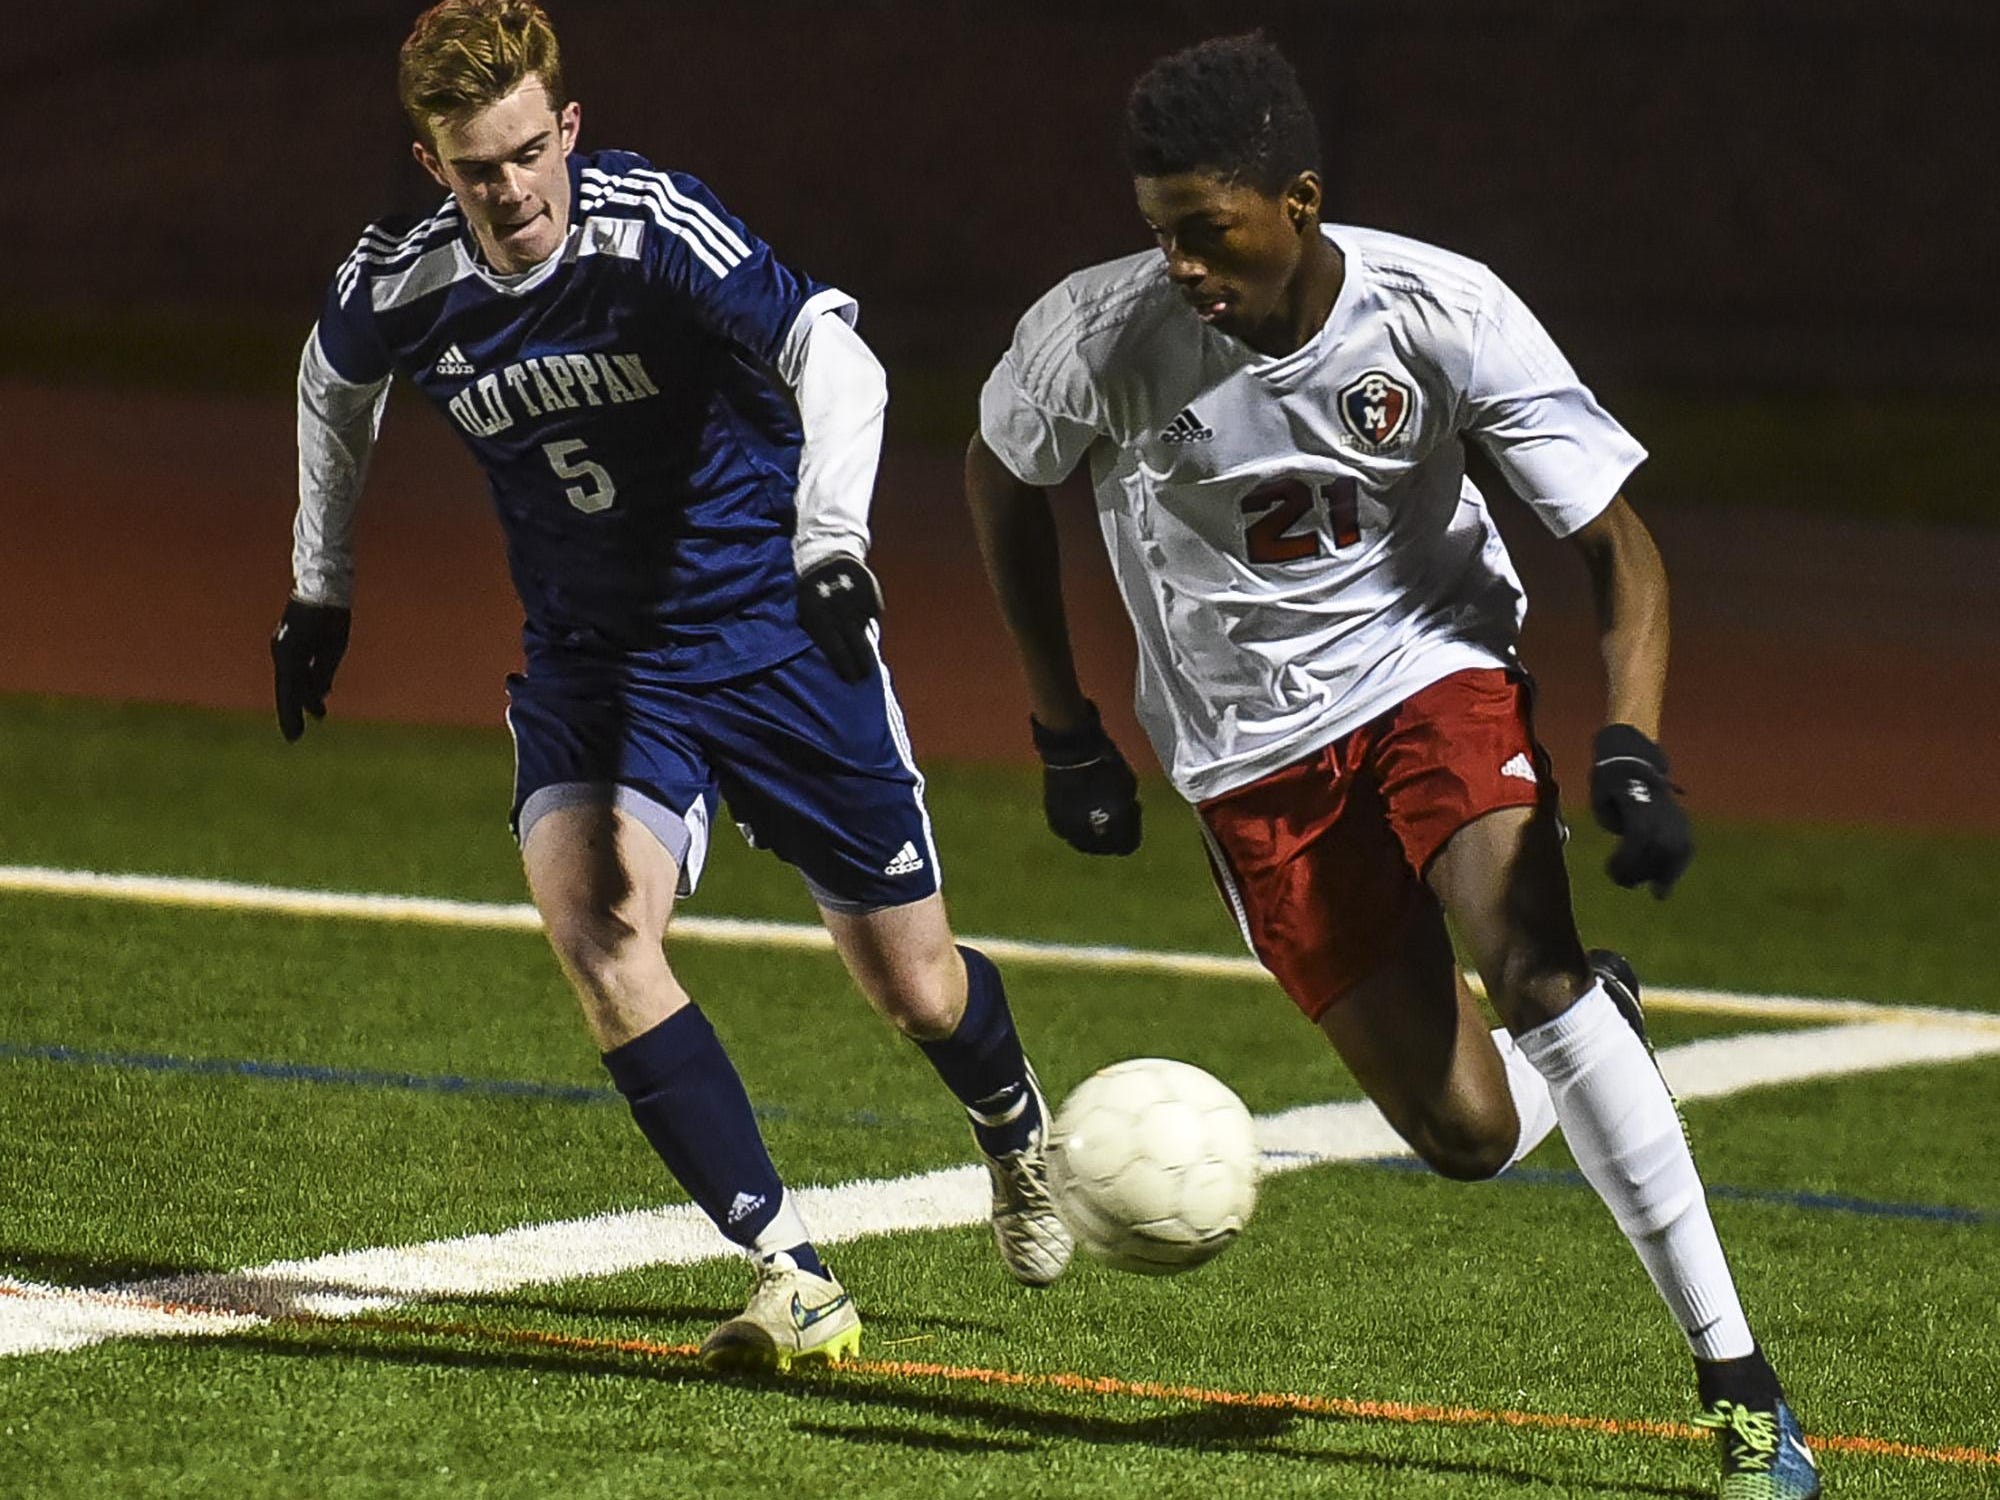 Old Tappan's Kevin Loudon (6) tries to pace Mendham's Julian Montilius (21)in the NJSIAA Group III Semifinal at Ridge High School in Basking Ridge, November 17, 2015. Photo by Warren Wetura for the Daily Record.